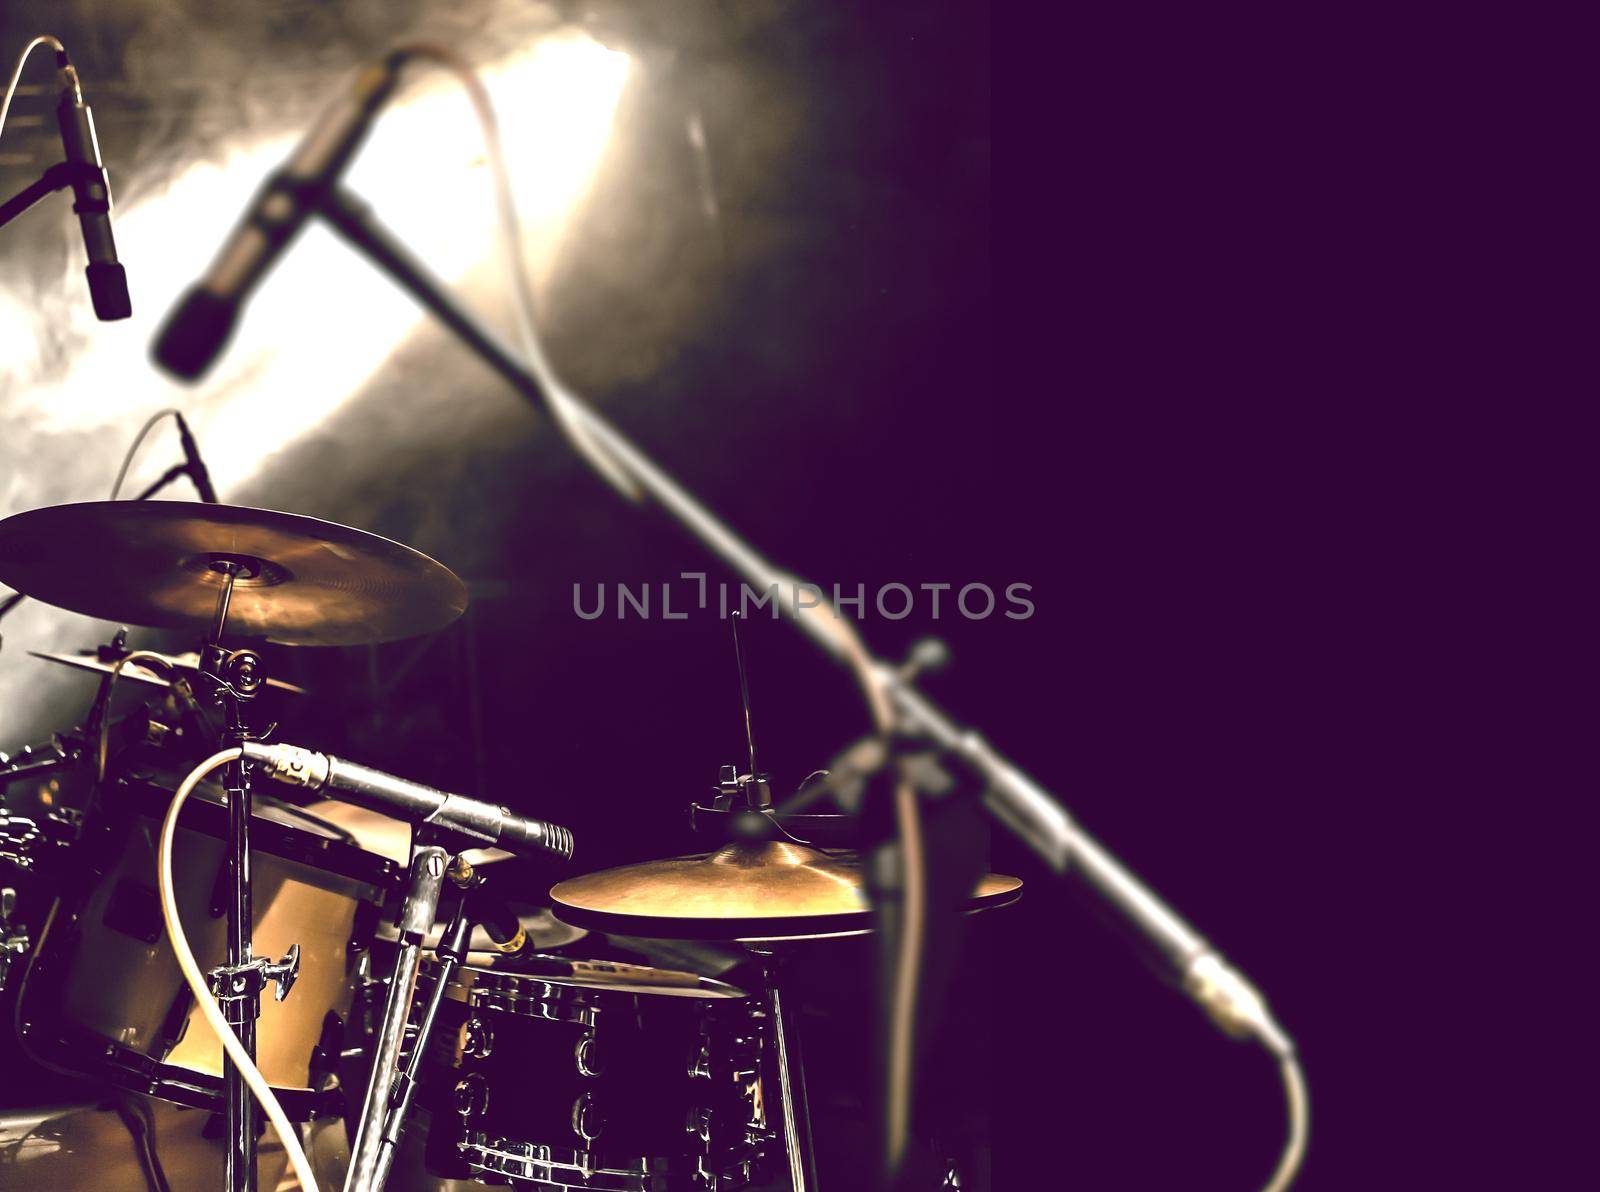 Drum on stage and event by carloscastilla